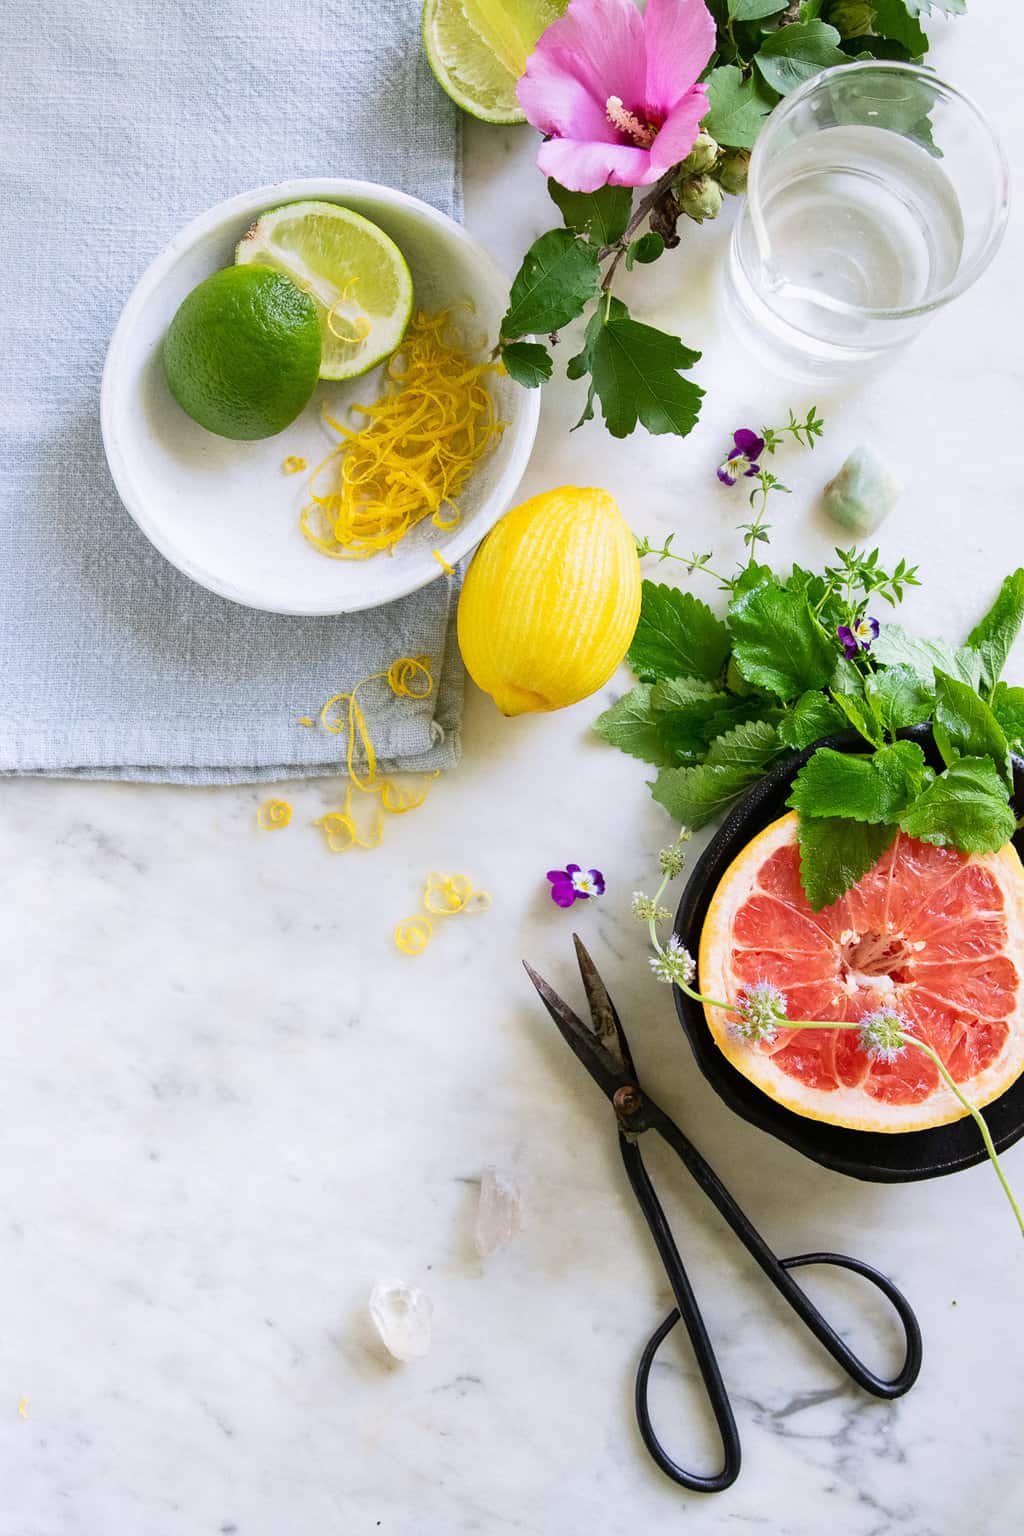 Citrus and herbal ingredients for making Florida Water